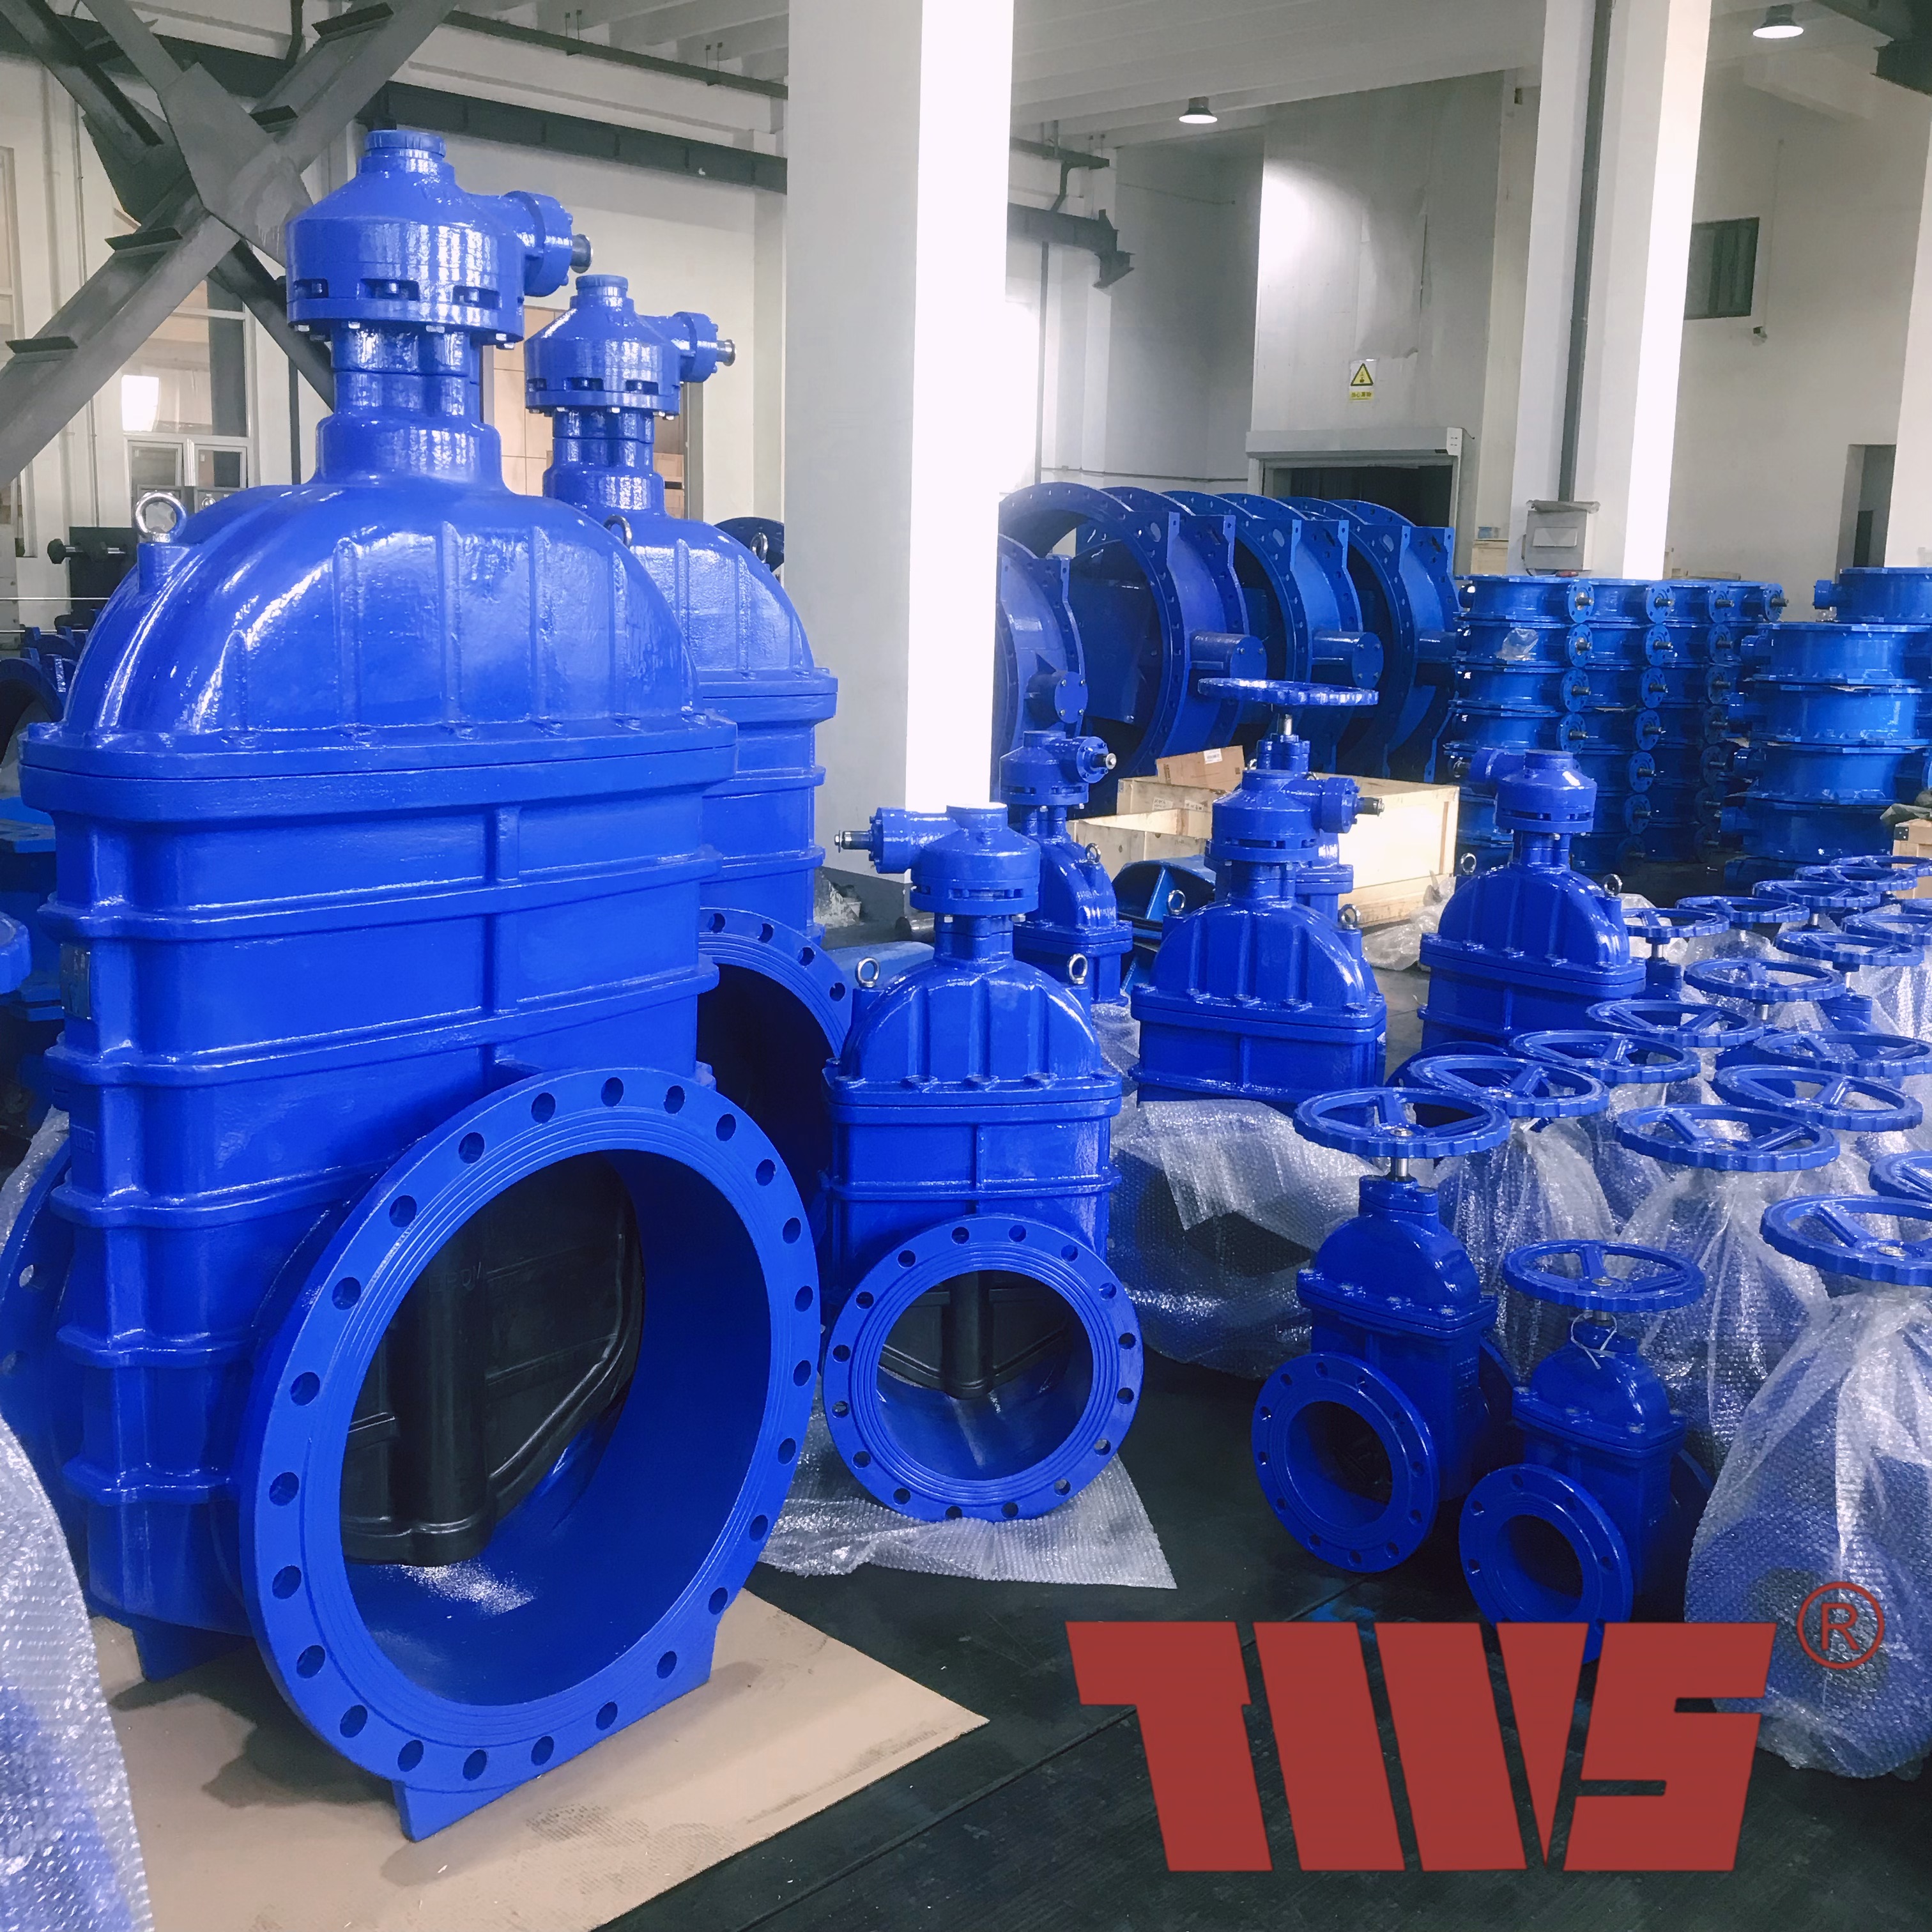 How to maintain the gate valve with worm gear?